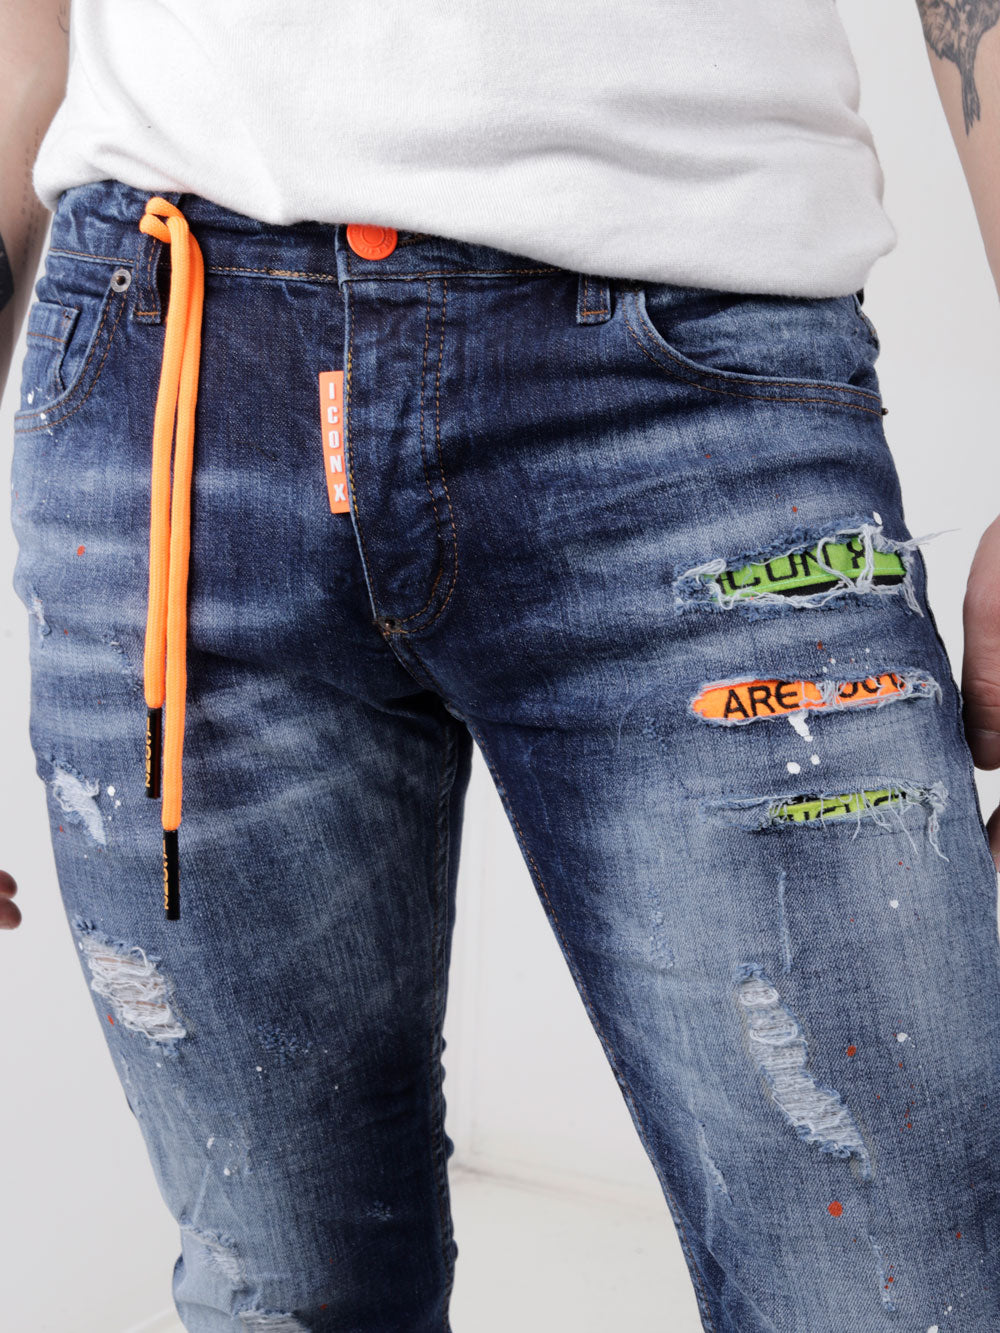 A man wearing ripped GRAPHITE jeans with orange stripes.